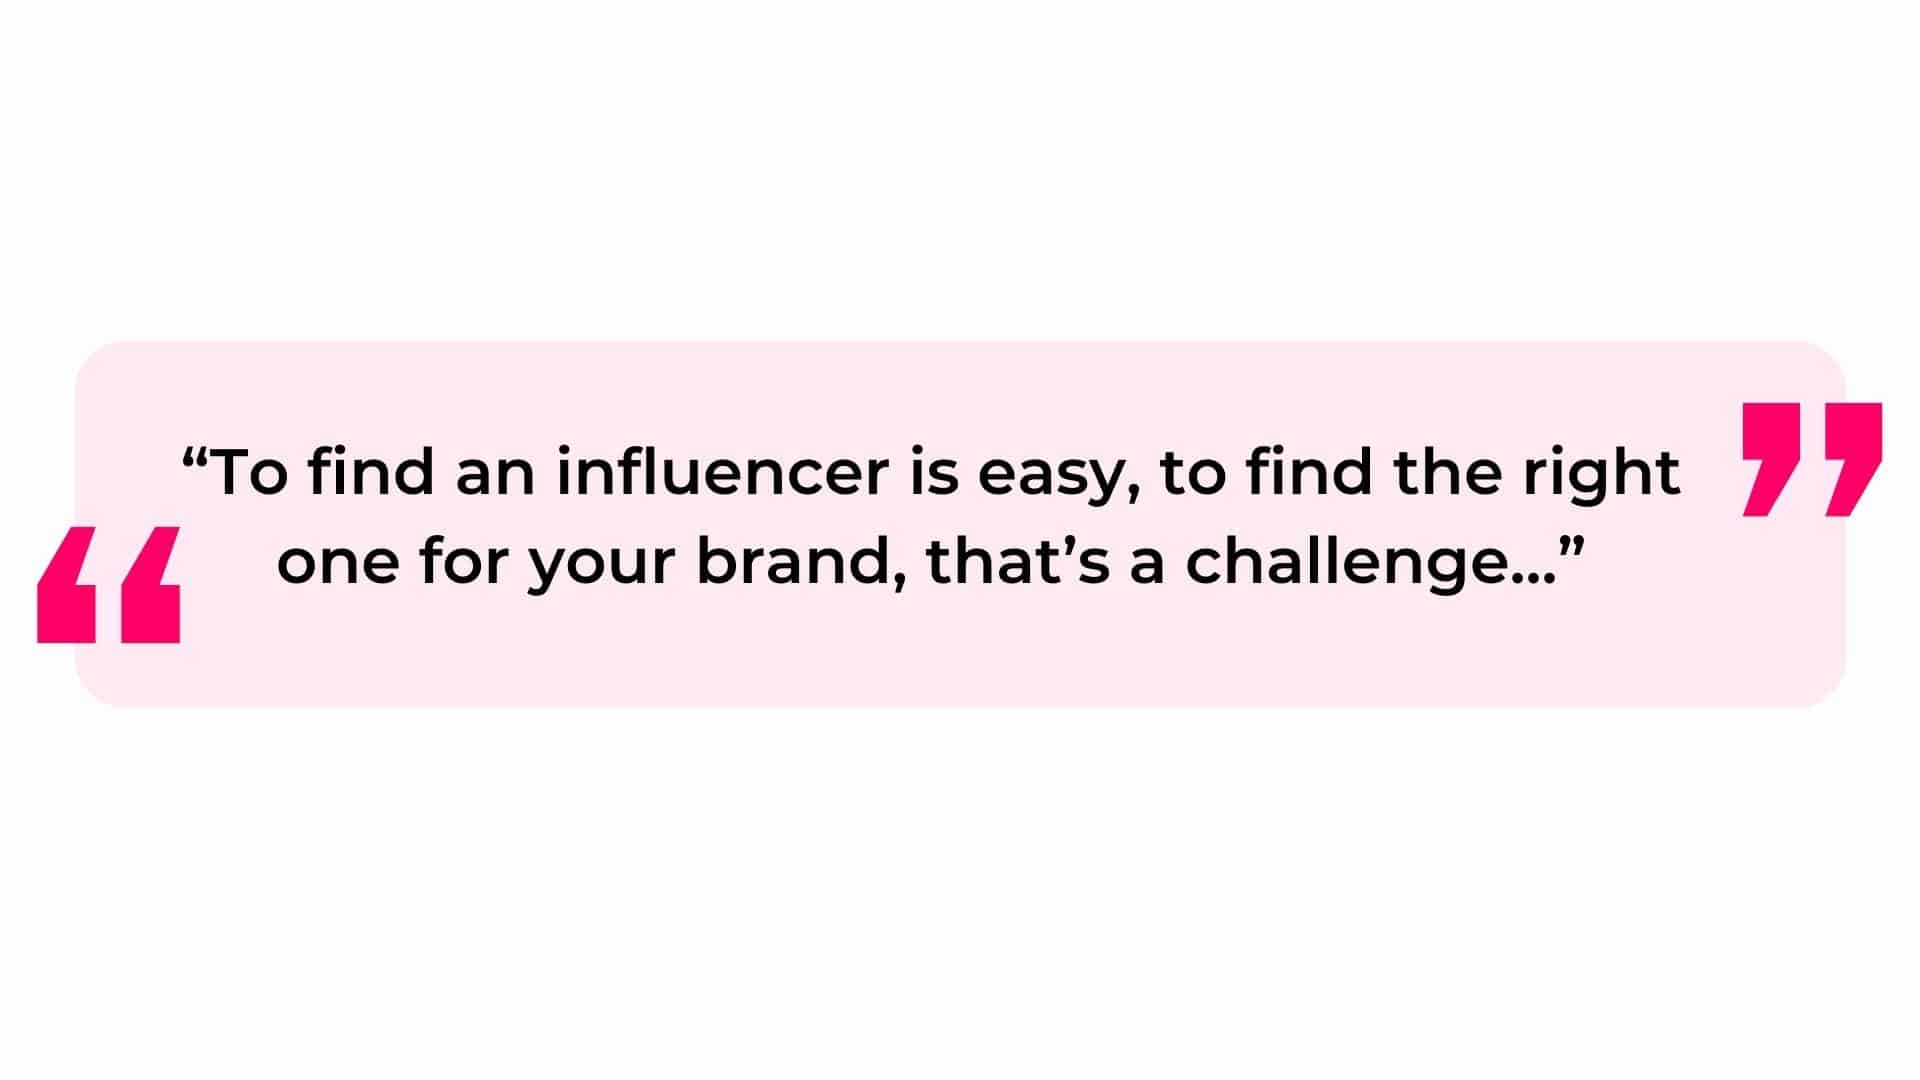 Find an influencer is easy, find the right one for your brand that's a challenge.